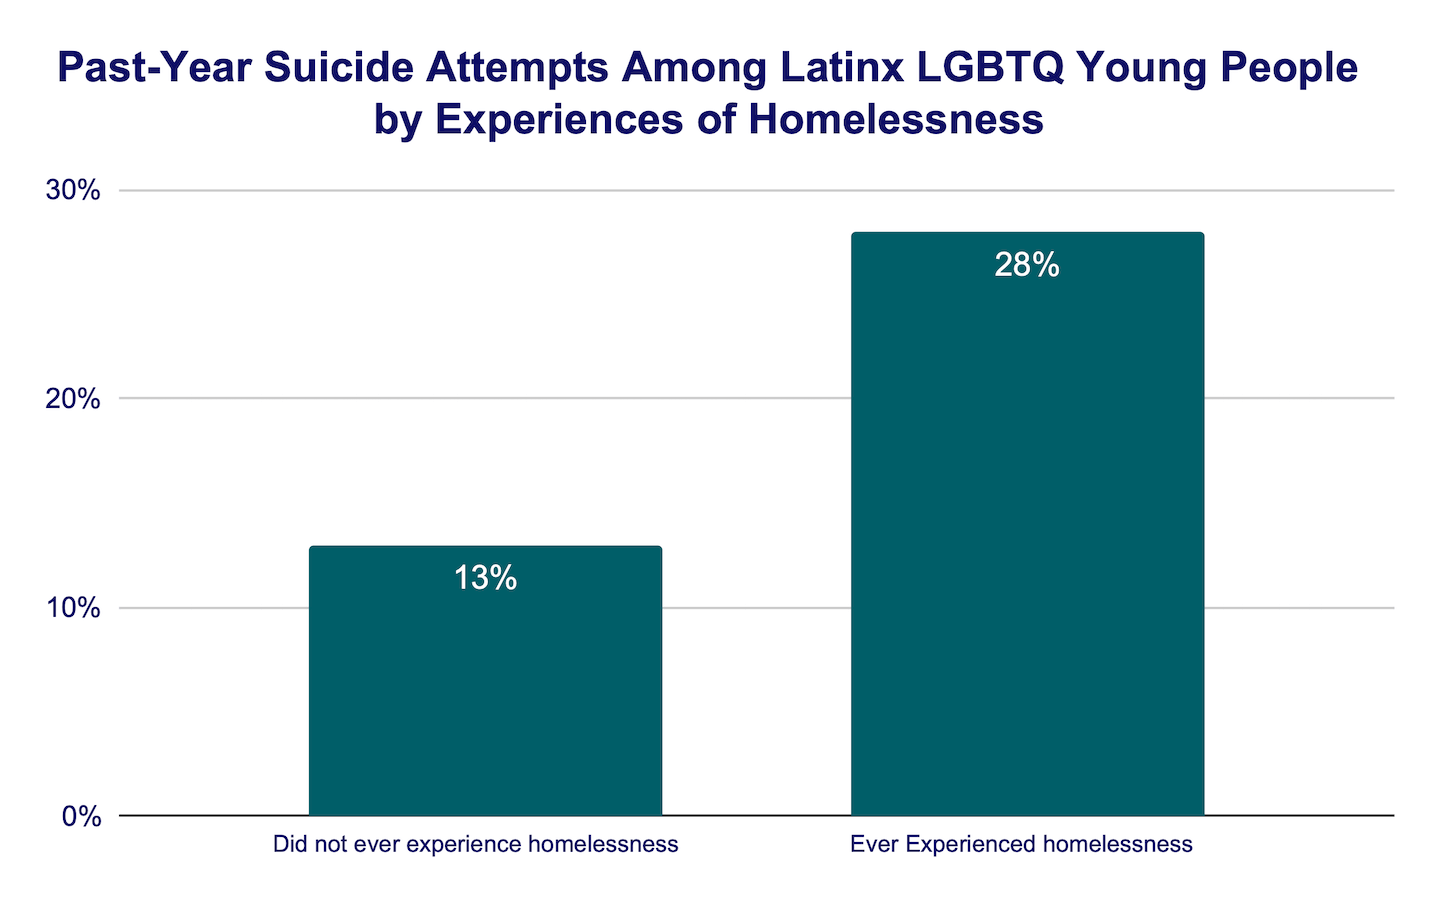 Past-year suicide attempts among Latinx LGBTQ young people by experiences of homelessness bar graph